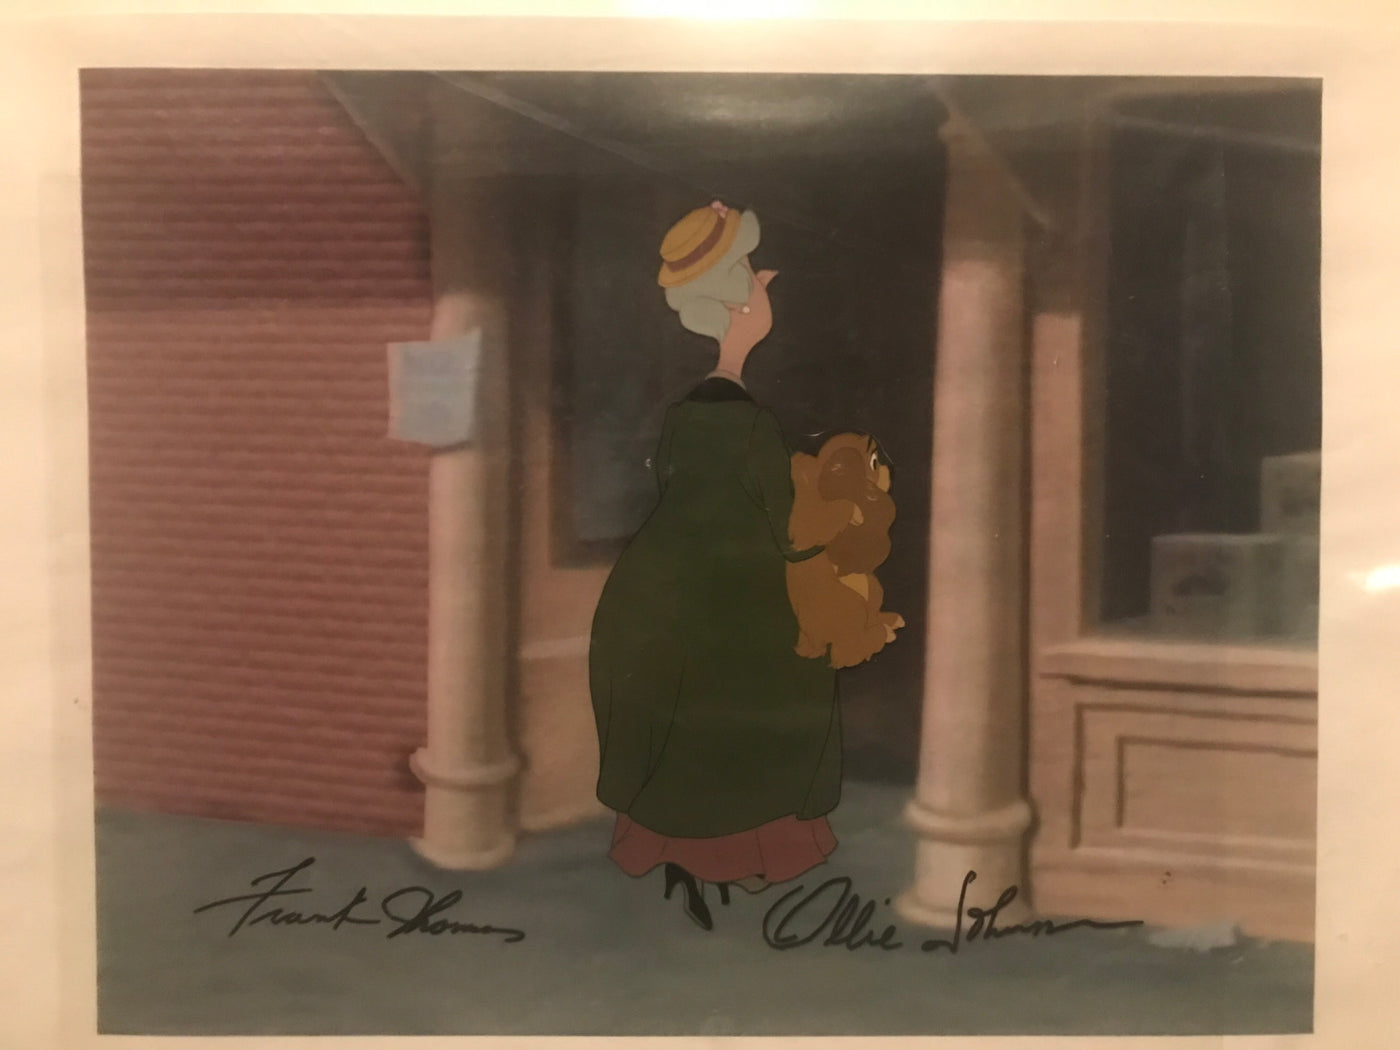 Original Walt Disney Production Cel from Lady and the Tramp signed by Frank Thomas and Ollie Johnston